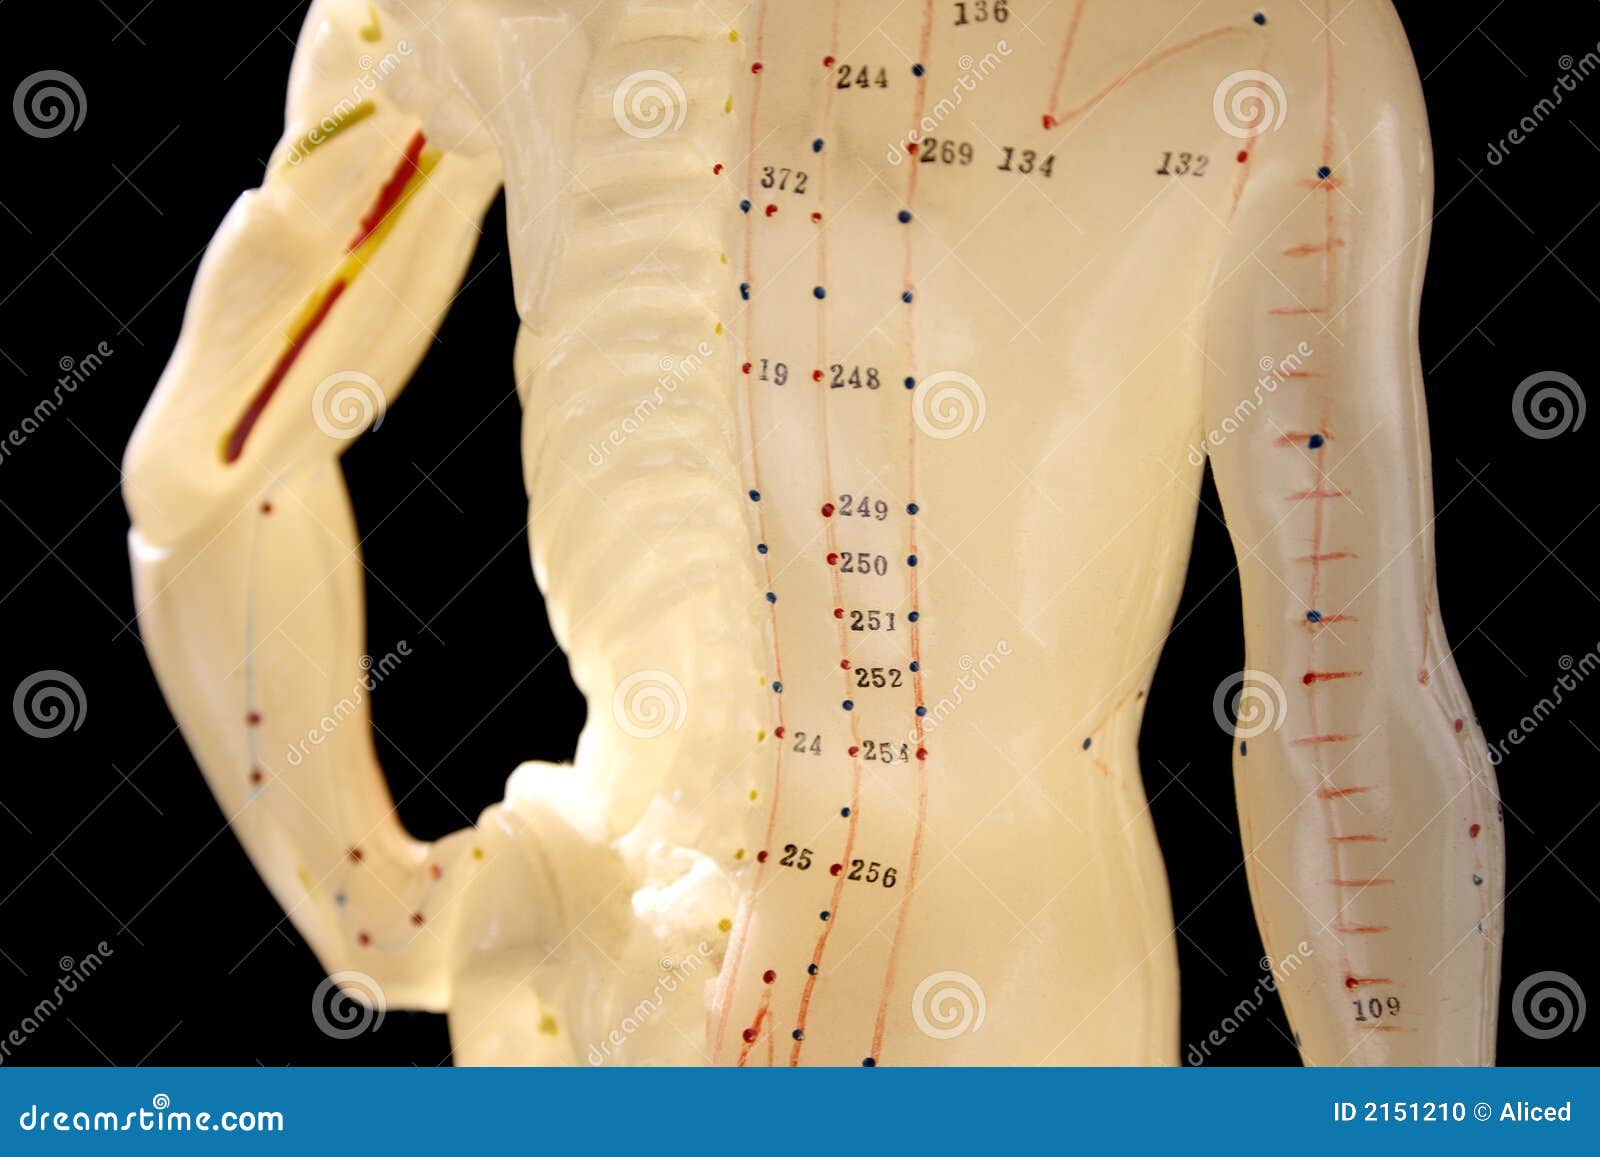 figure used in acupuncture 3